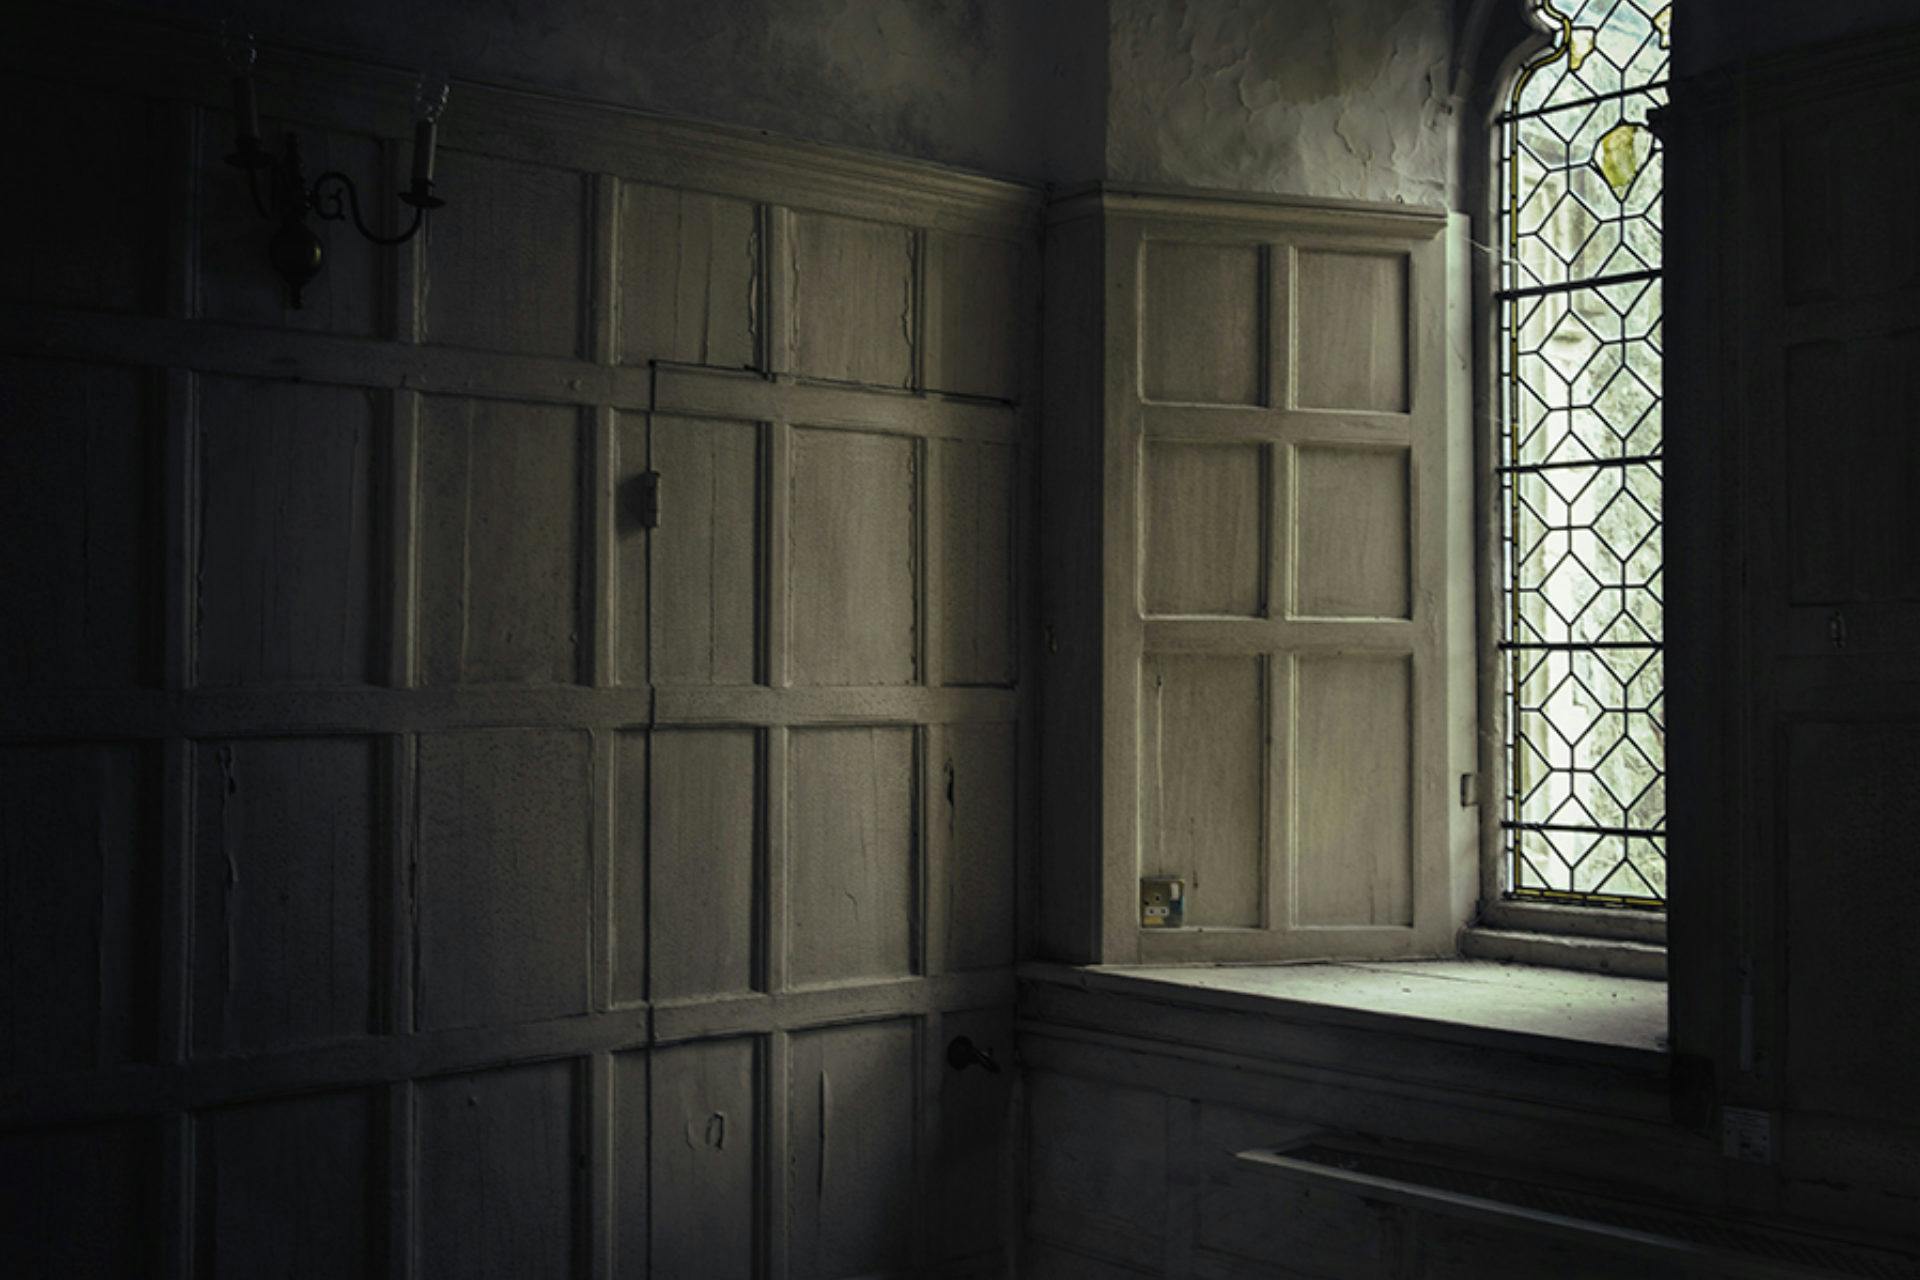 Dimly lit room with vintage wood panelling and a leaded window letting in minimal light, creating a moody atmosphere.